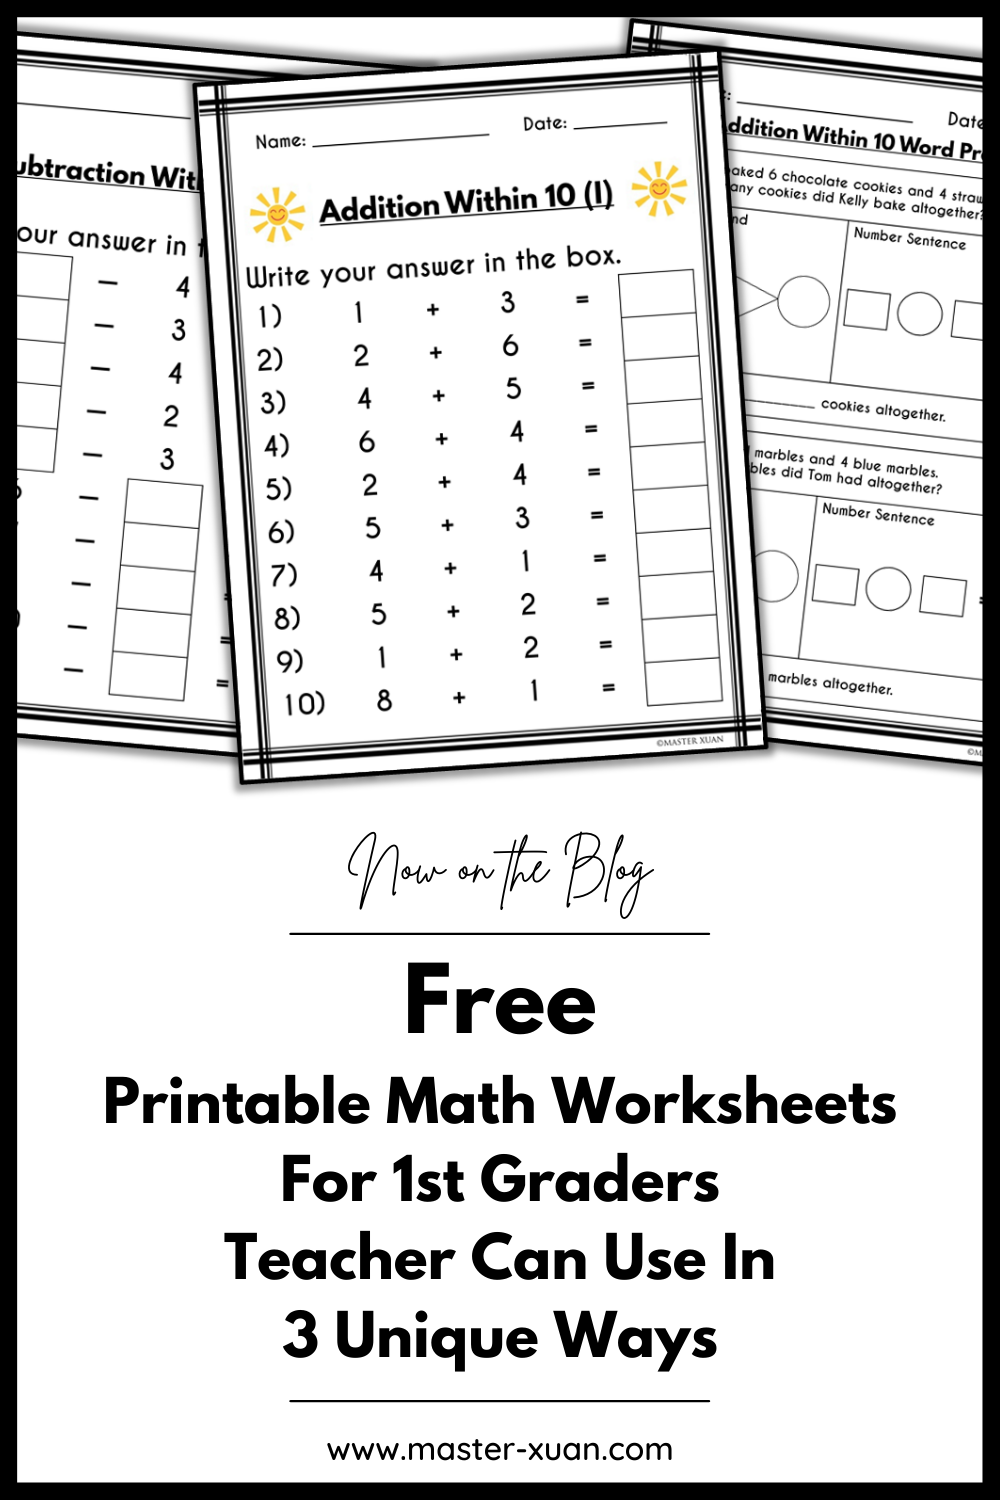 free-printable-math-worksheets-for-1st-graders-teacher-can-use-in-3